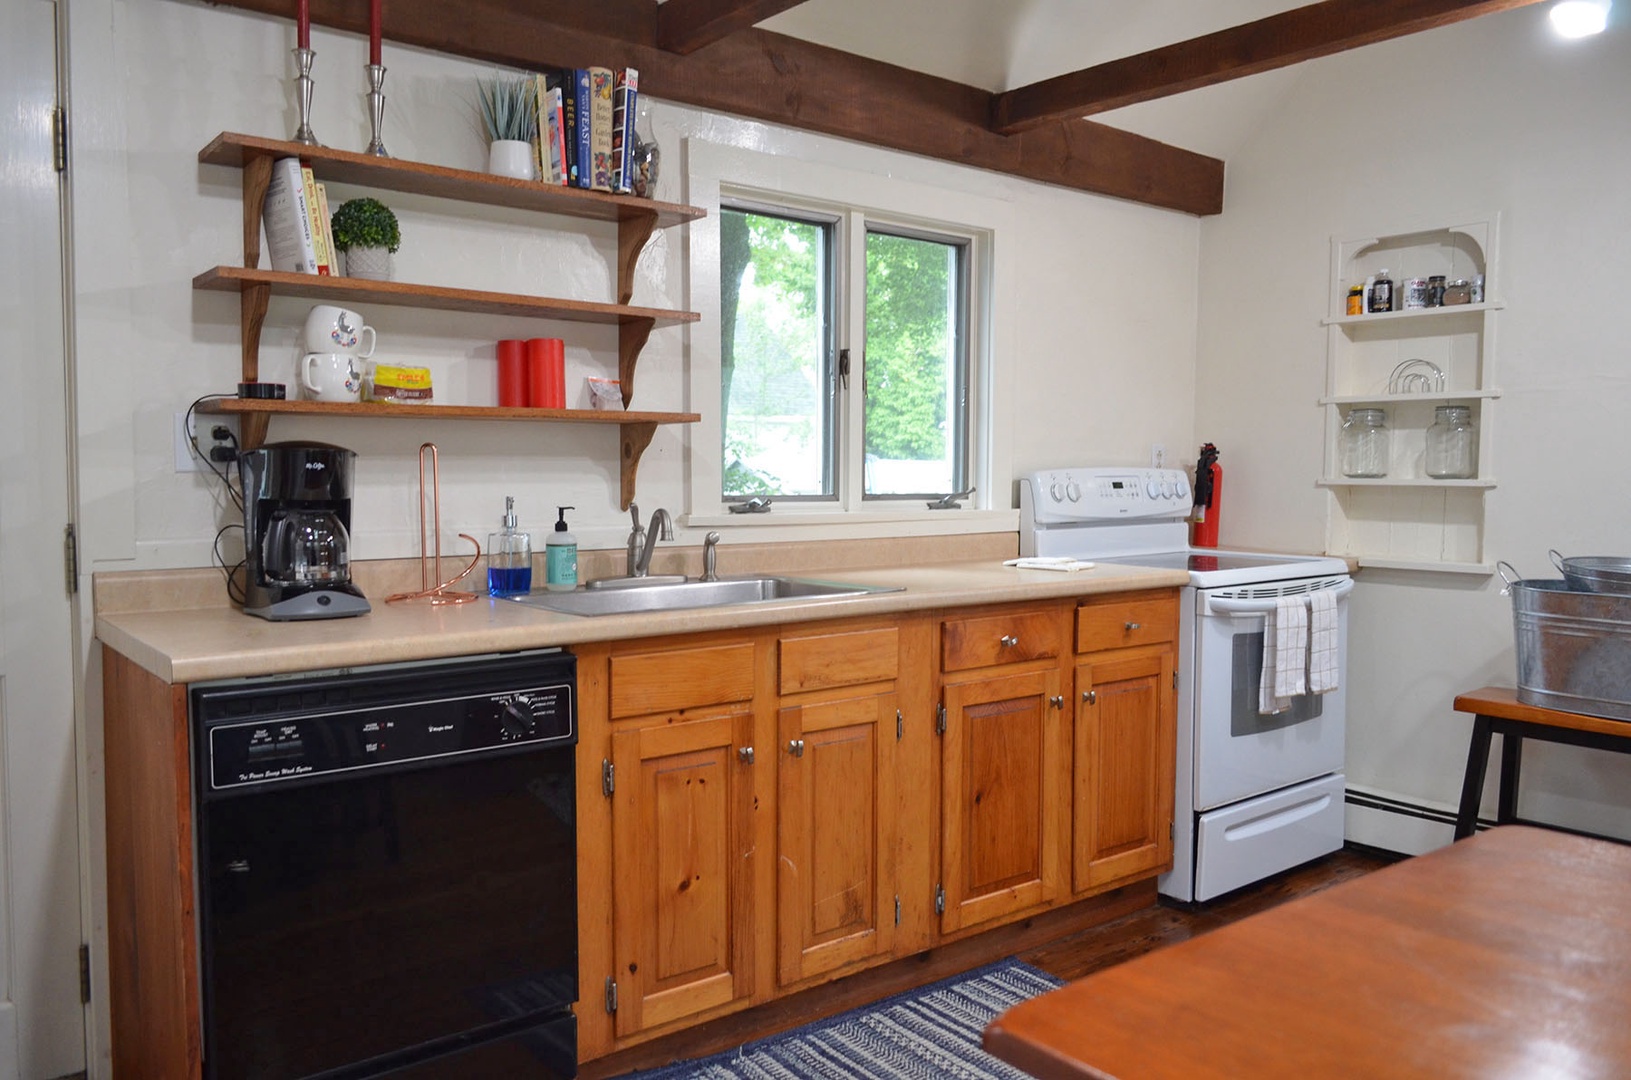 The kitchen has beautiful wooden cabinetry and exposed beams. 